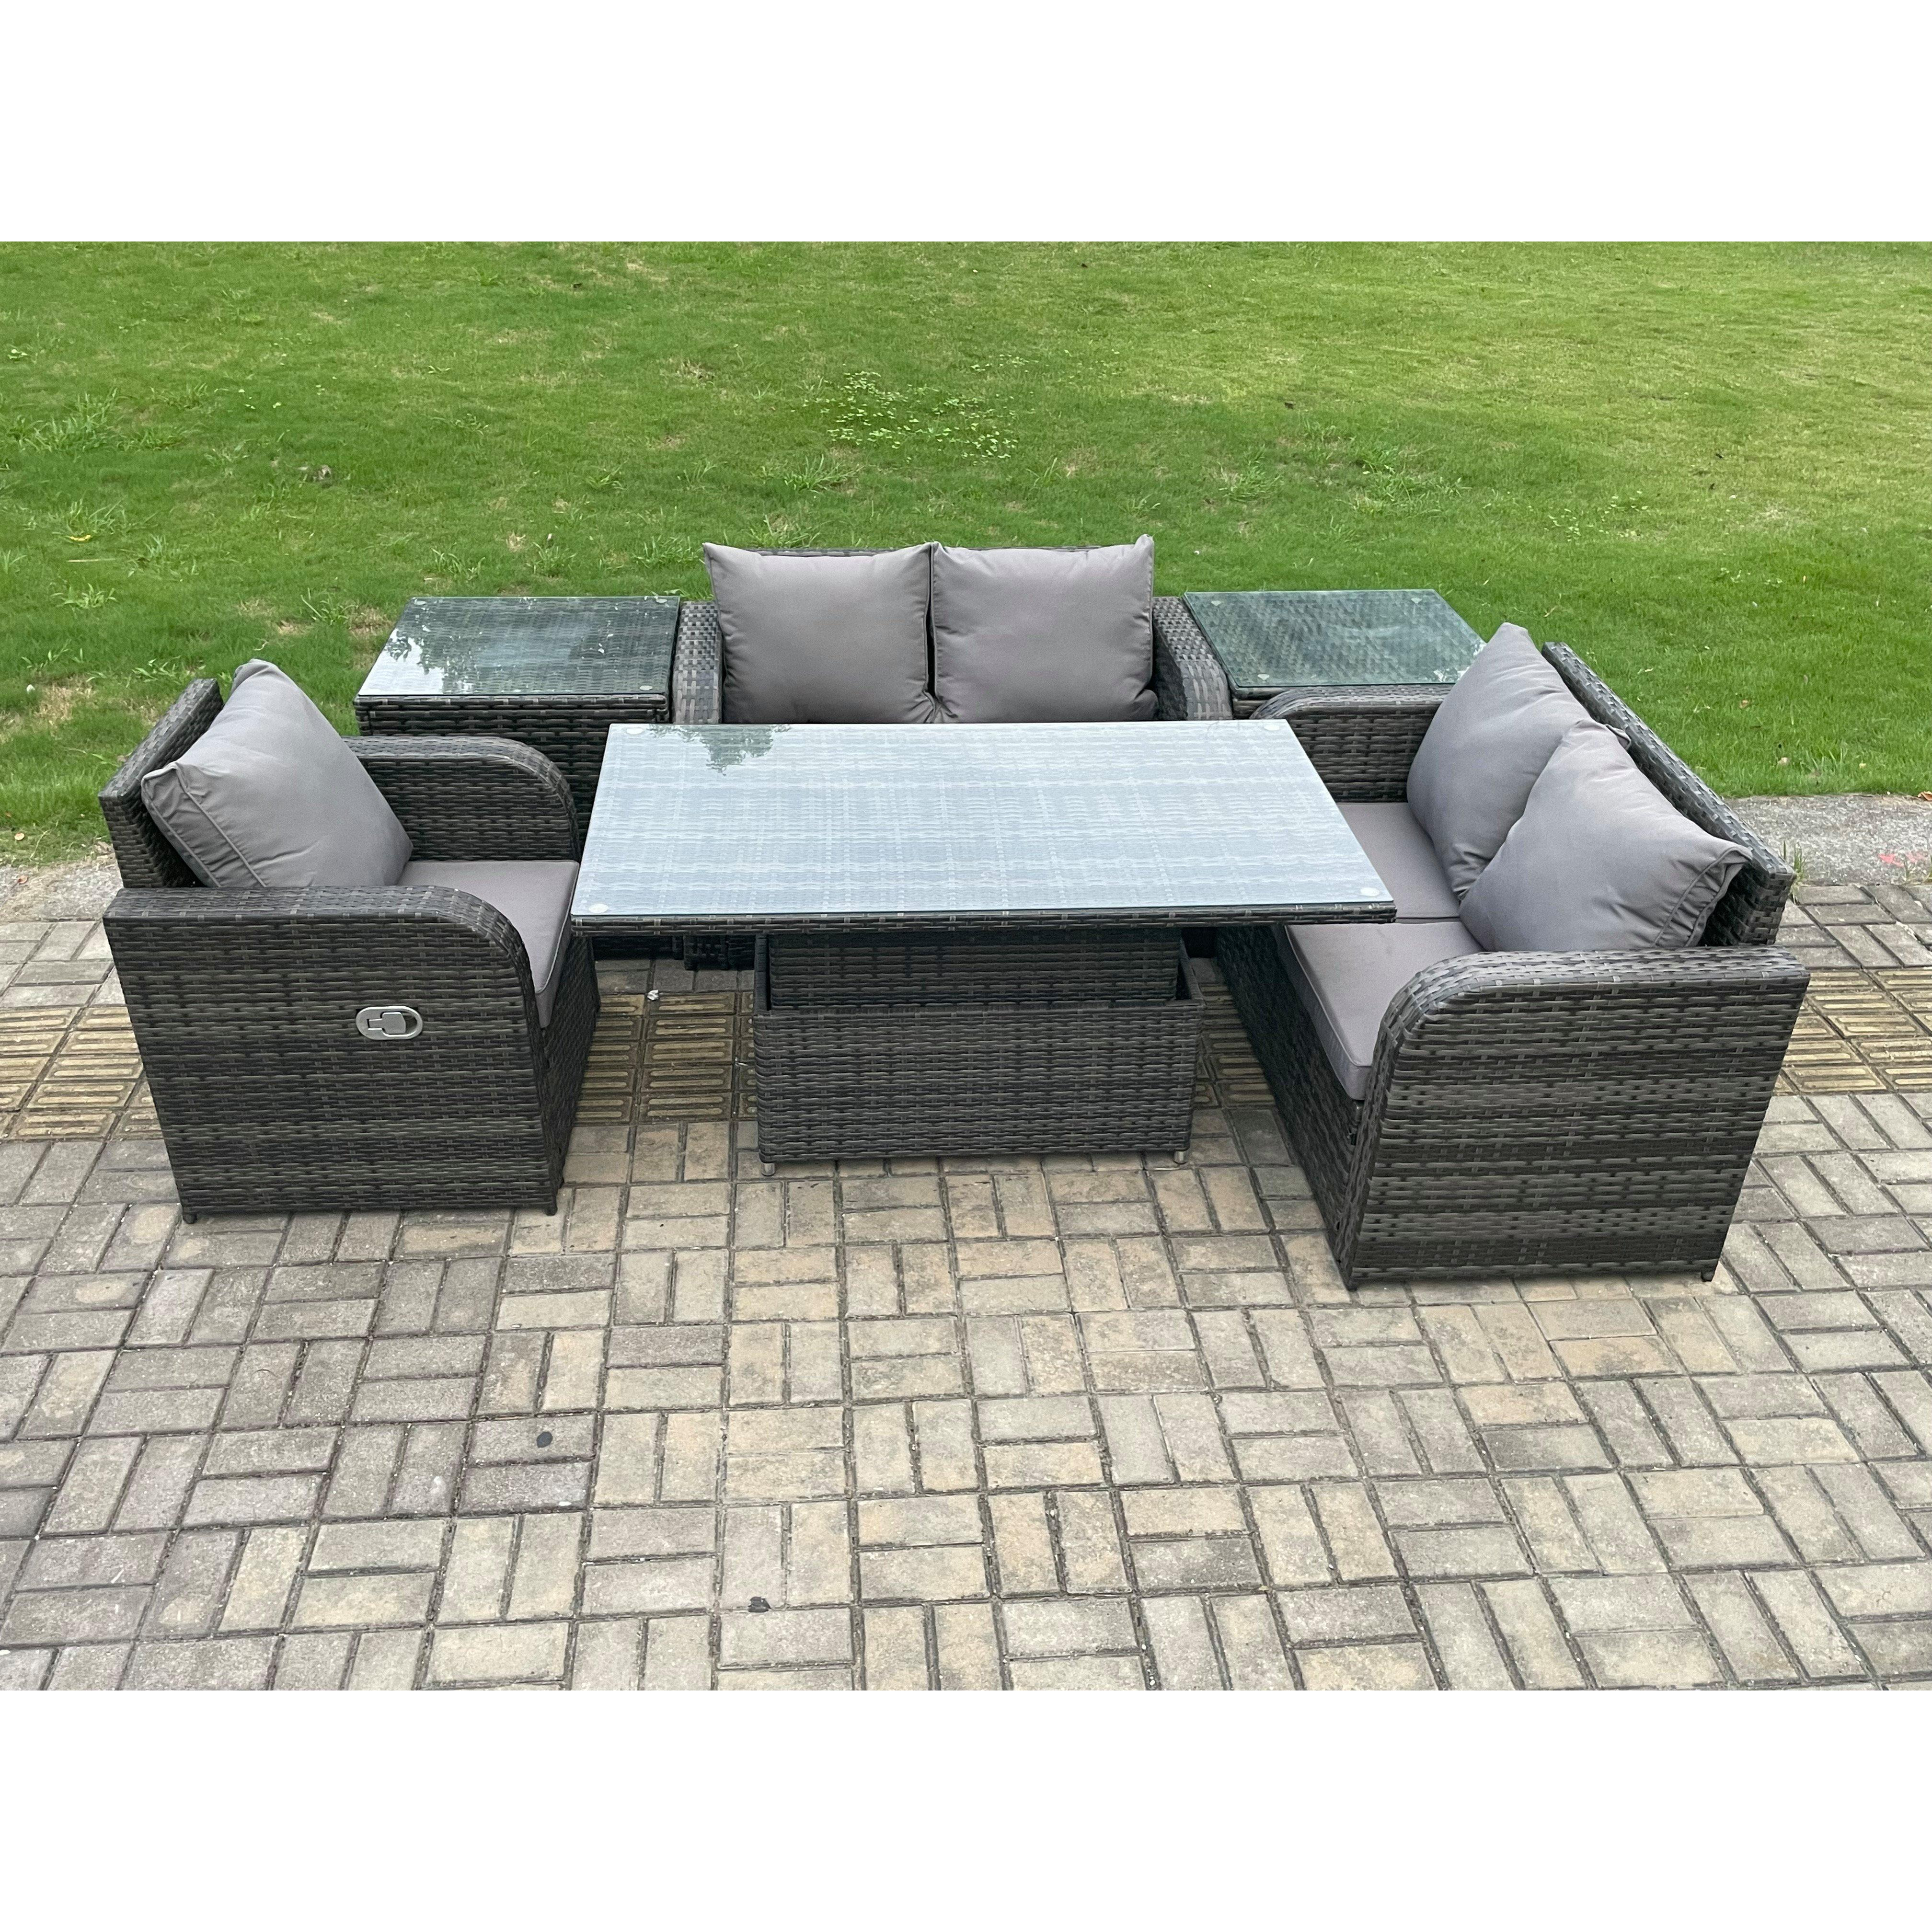 5 Seater Rattan Furniture Garden Dining Set Outdoor Height Adjustable Rising lifting Table Love Sofa Chair - image 1